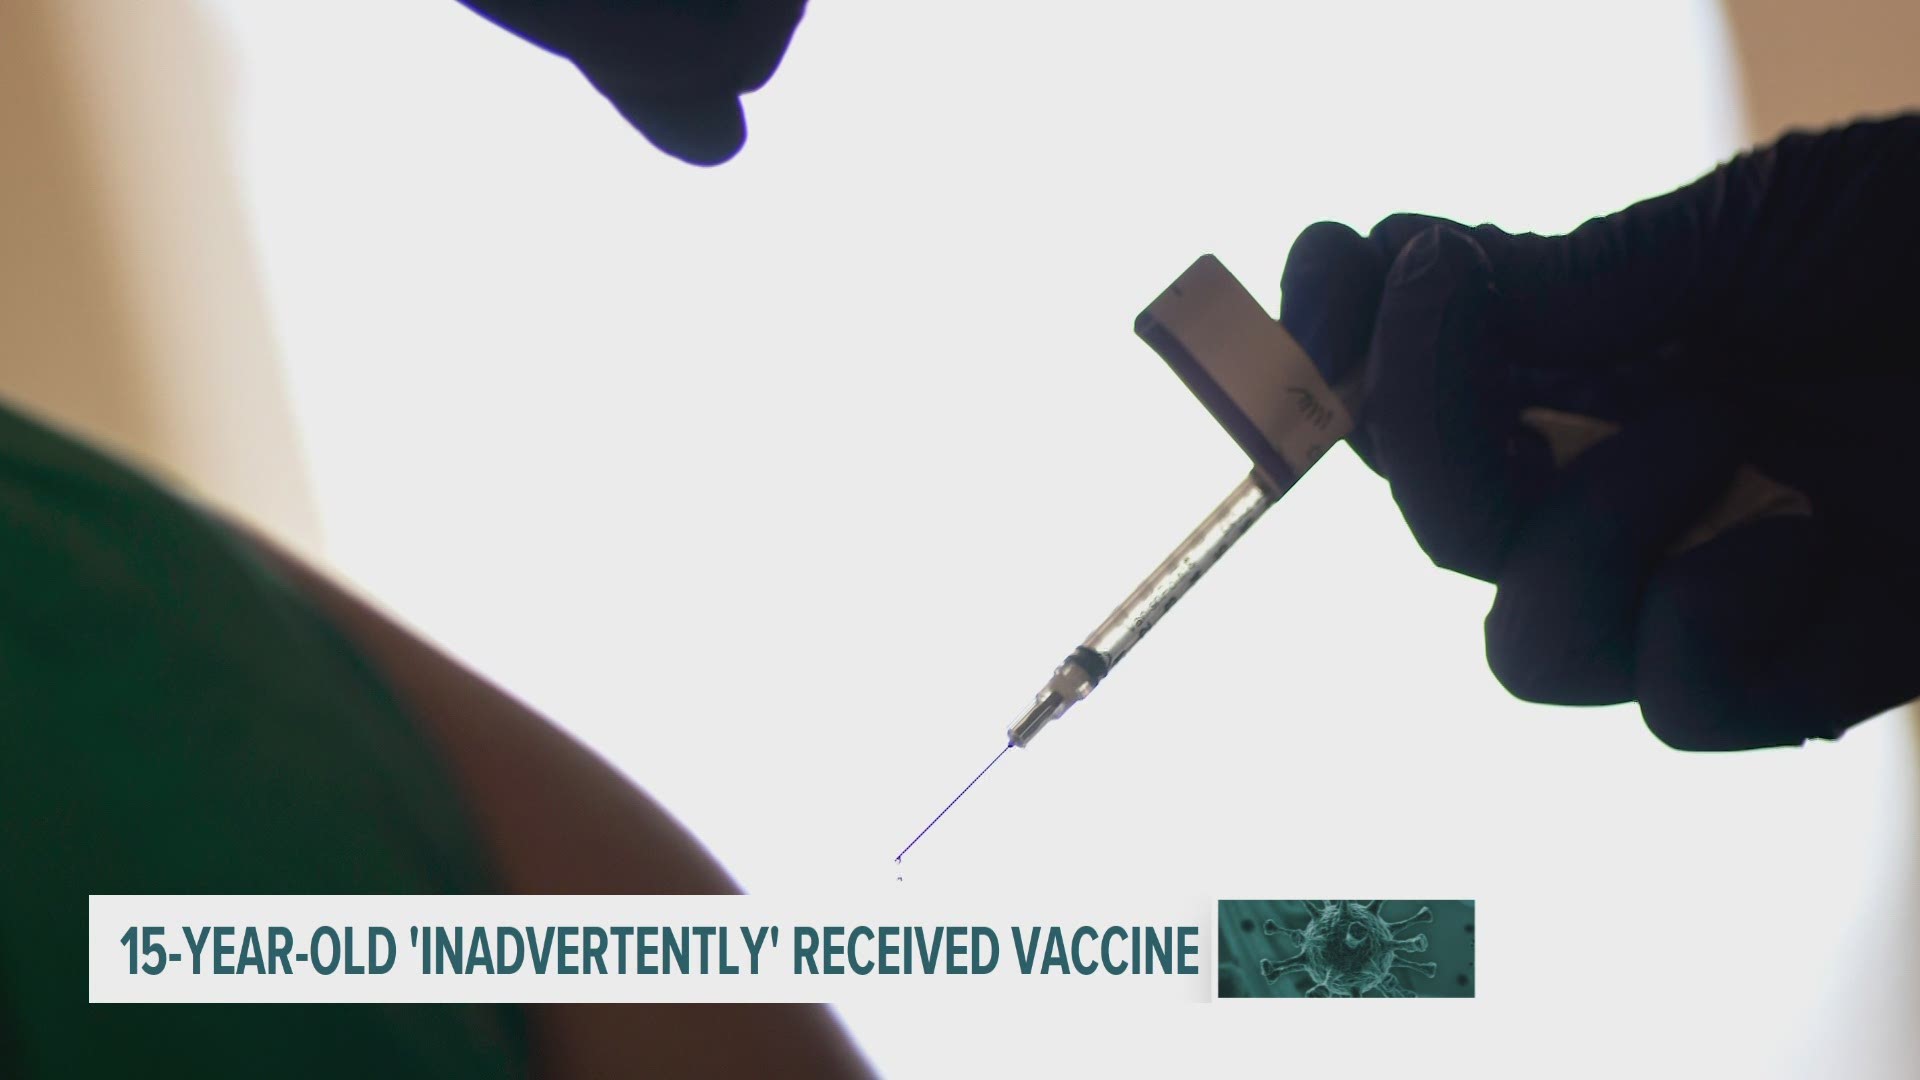 According to the report, the teenager did not report any reactions when given the Moderna vaccine in December.